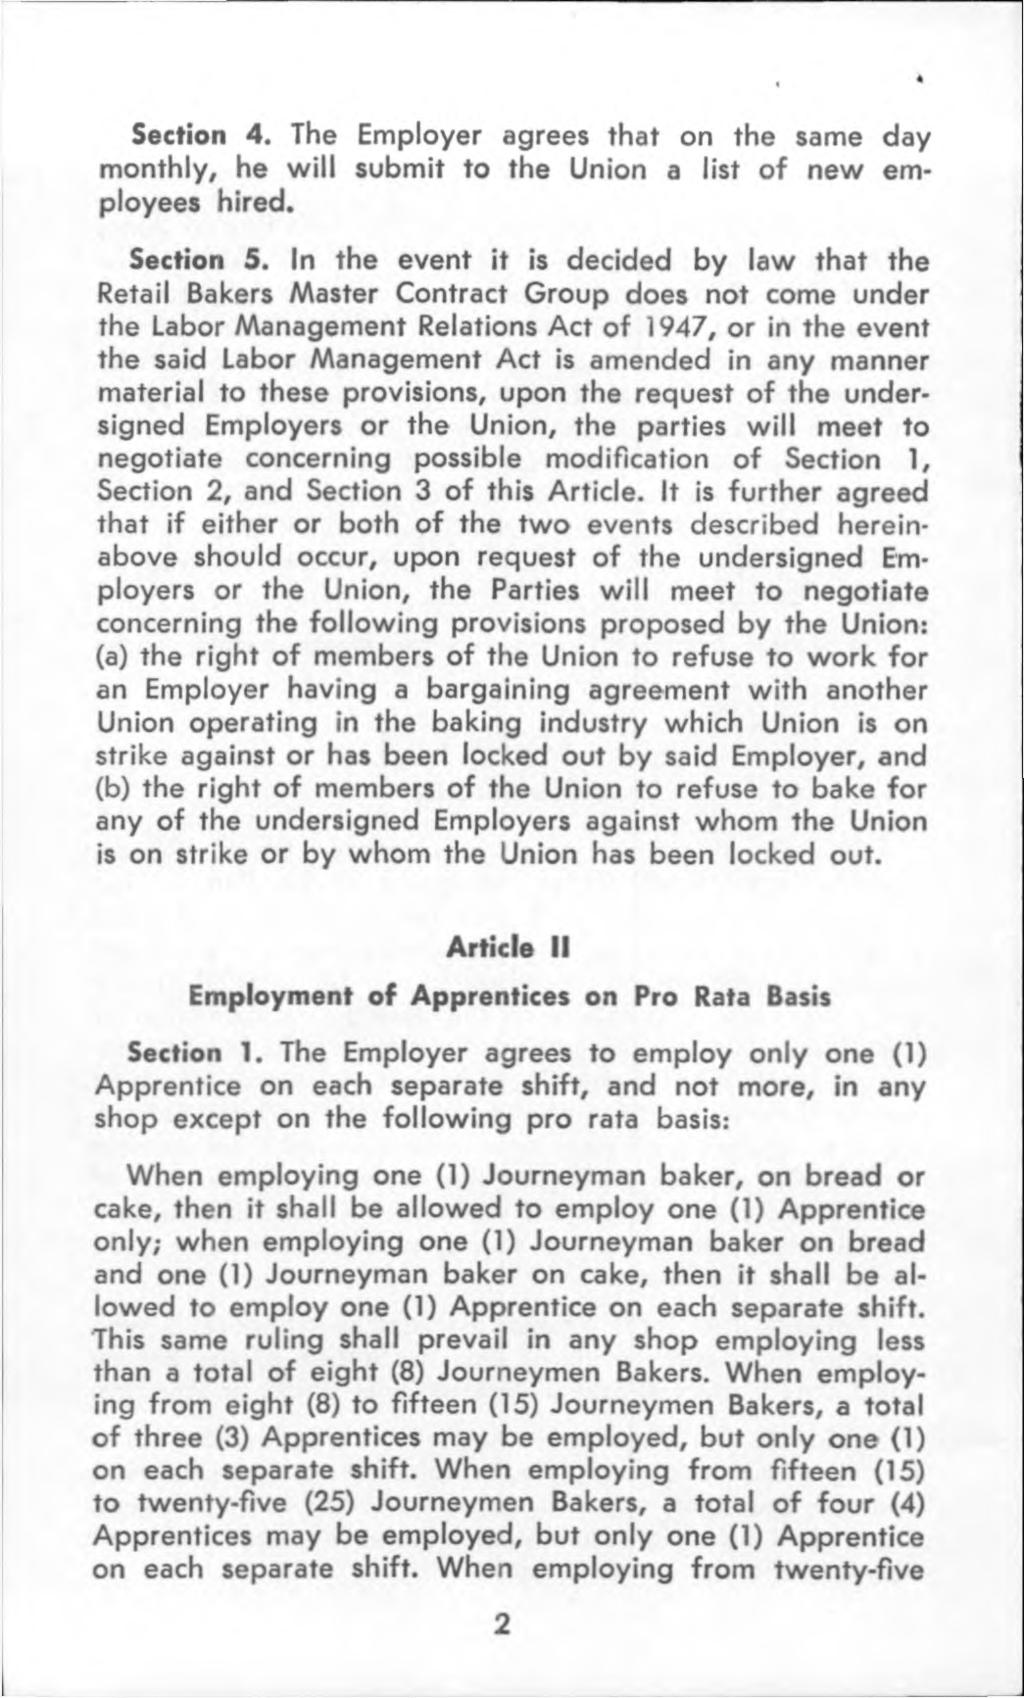 Section 4. The Employer agrees that on the same day monthly, he will submit to the Union a list of new employees hired. Section 5.